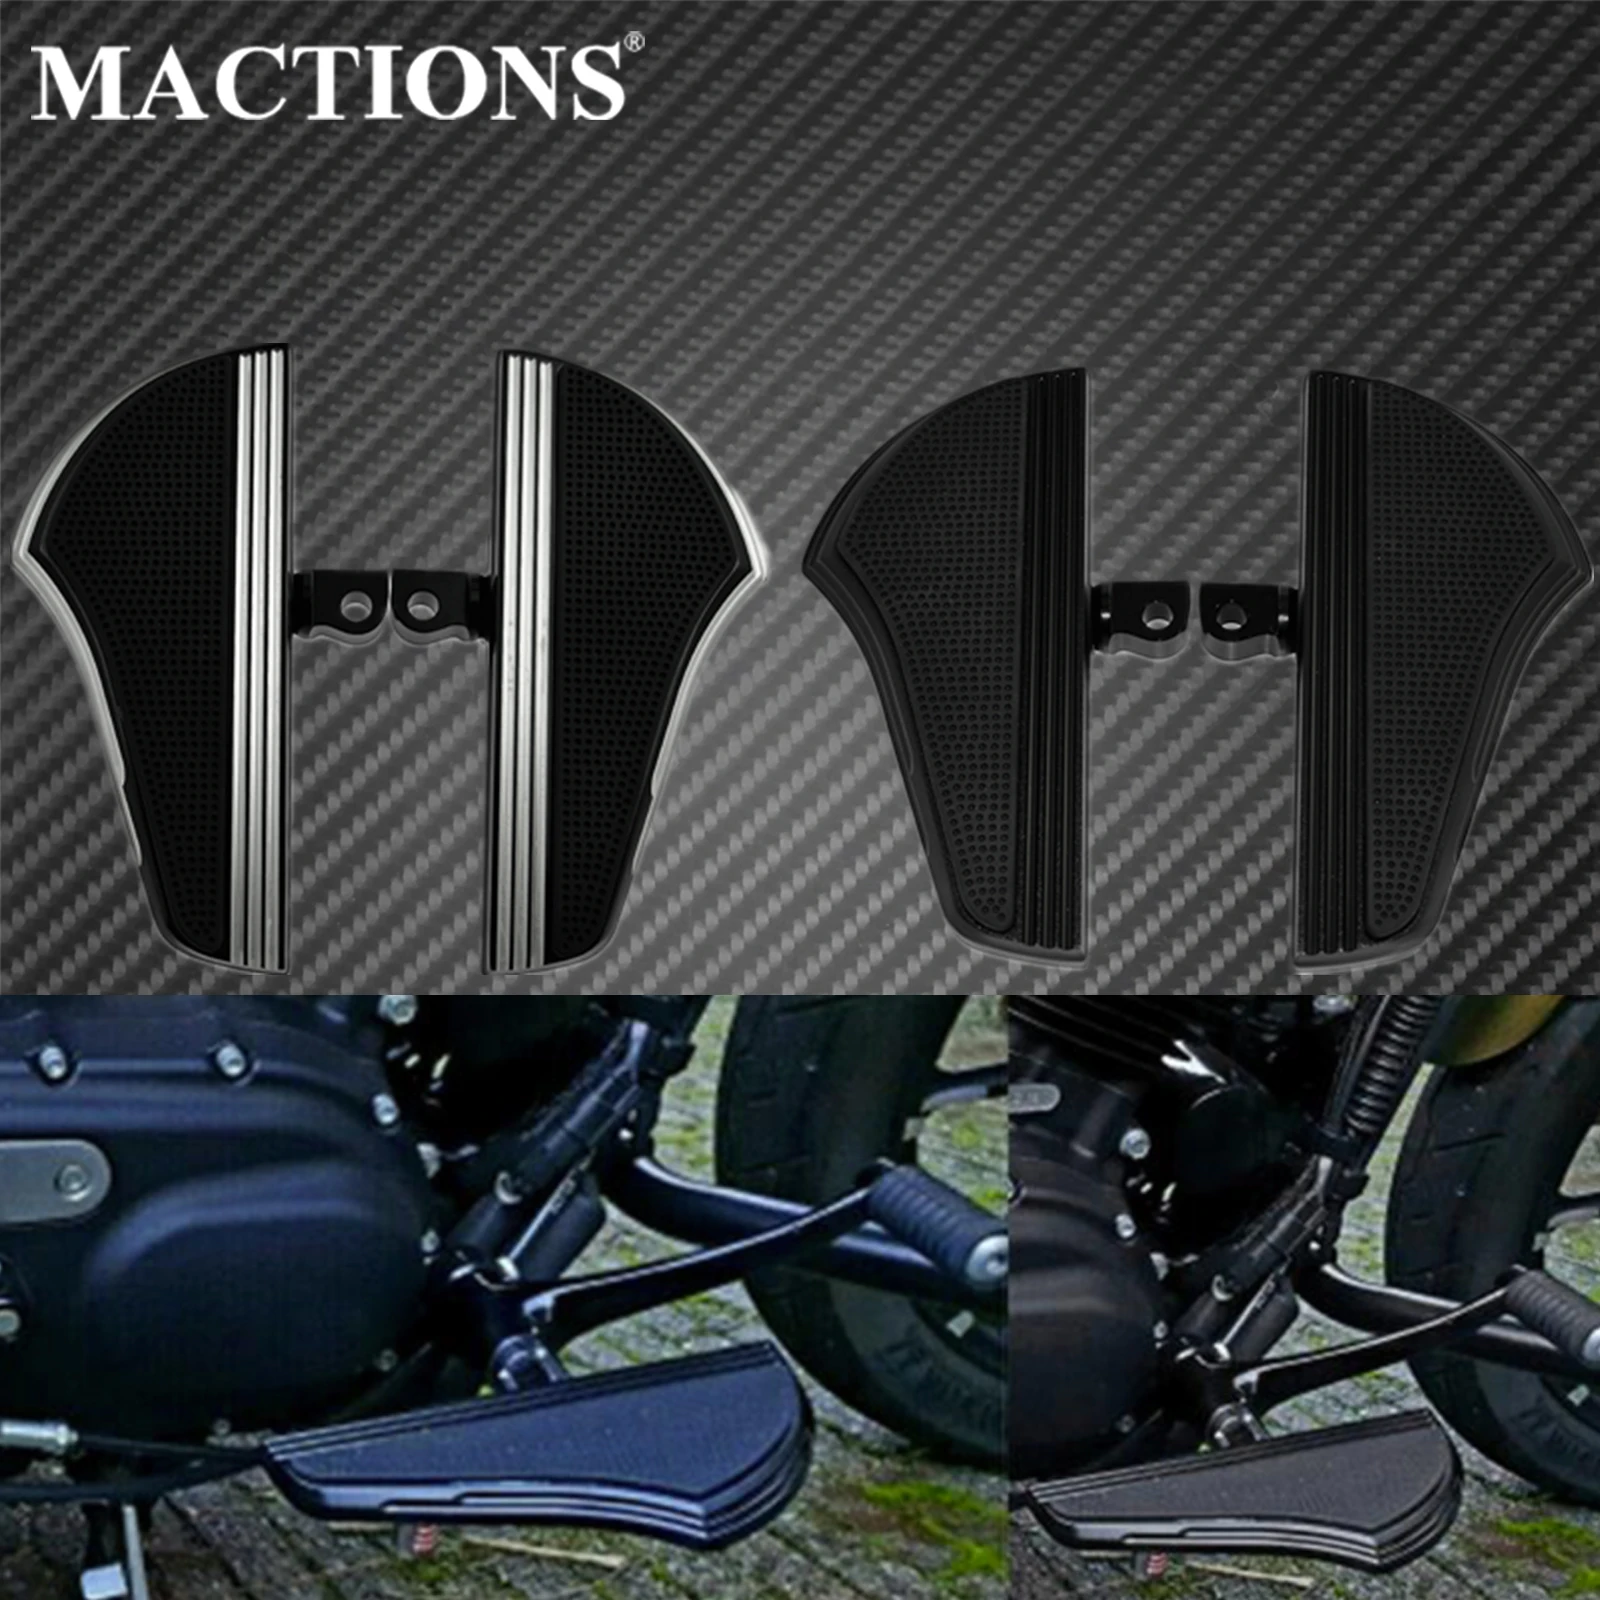 

2xMotorcycle CNC Rear Passenger Floorboards Footrest Male Mount Foot Pegs For Harley Touring Electra Glide Dyna Sportster XL 883